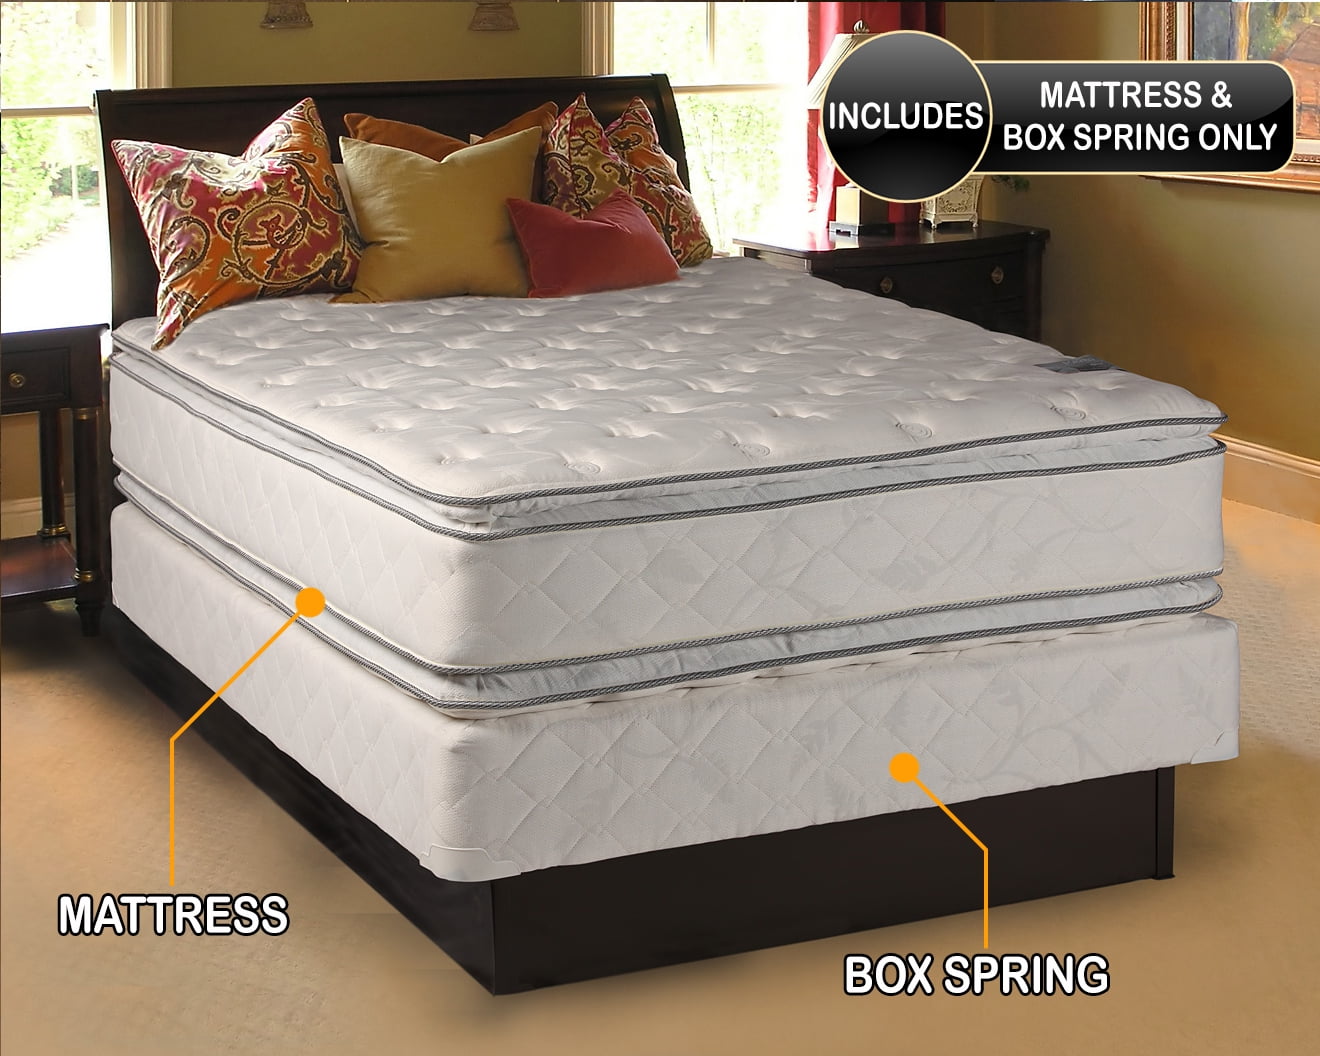 average cost of bed and mattress